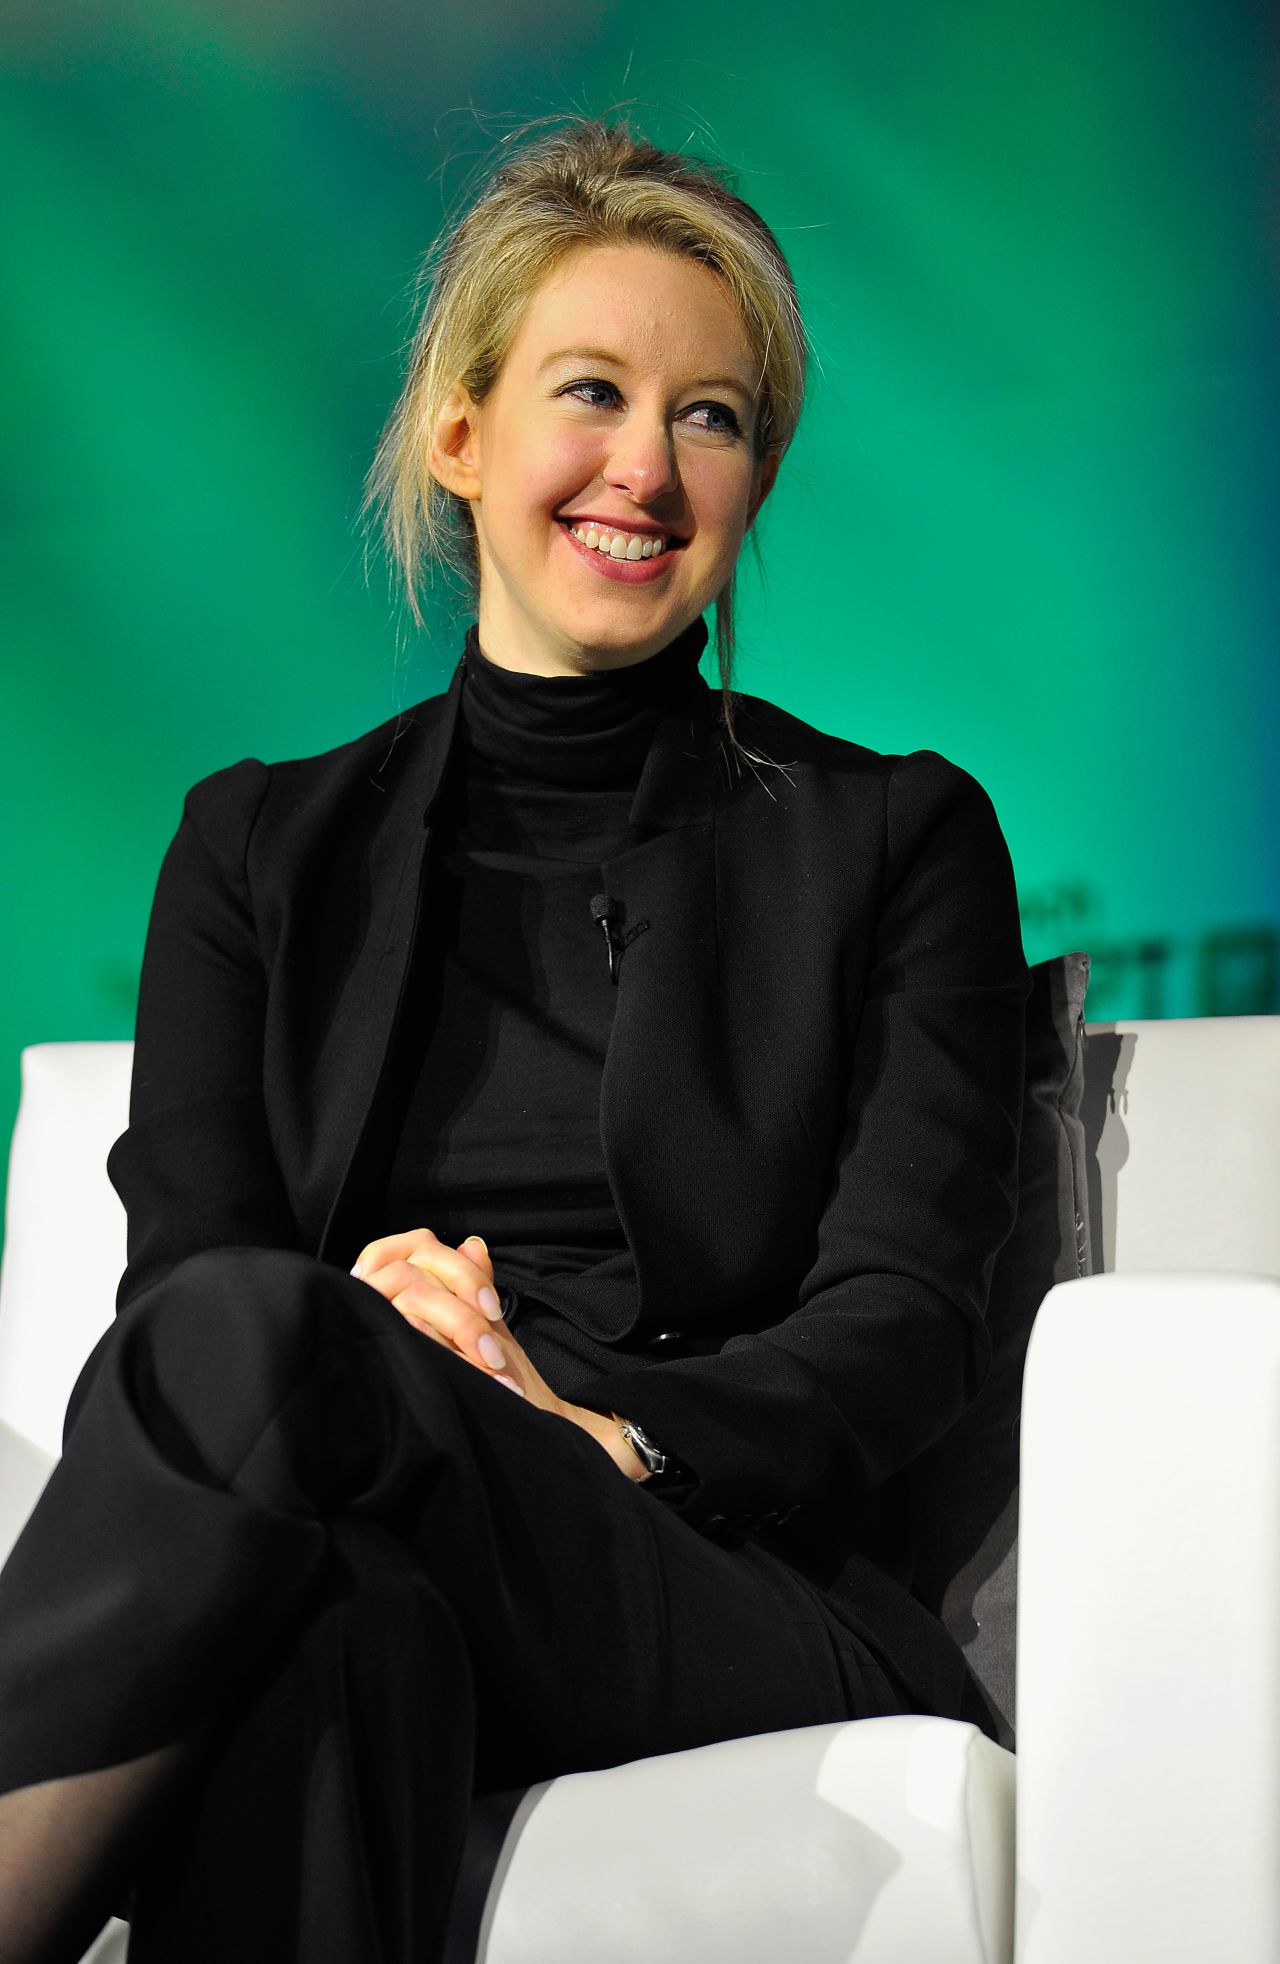 American Elizabeth Holmes, 32, is the world's youngest self-made female billionaire. She founded revolutionary blood diagnostics company, <a href="https://www.theranos.com/" target="_blank" target="_blank">Theranos</a>, which uses a <a href="http://edition.cnn.com/2015/11/12/health/theranos-what-we-know-science/">prick of blood</a> to get the same results as you would from an entire vial.